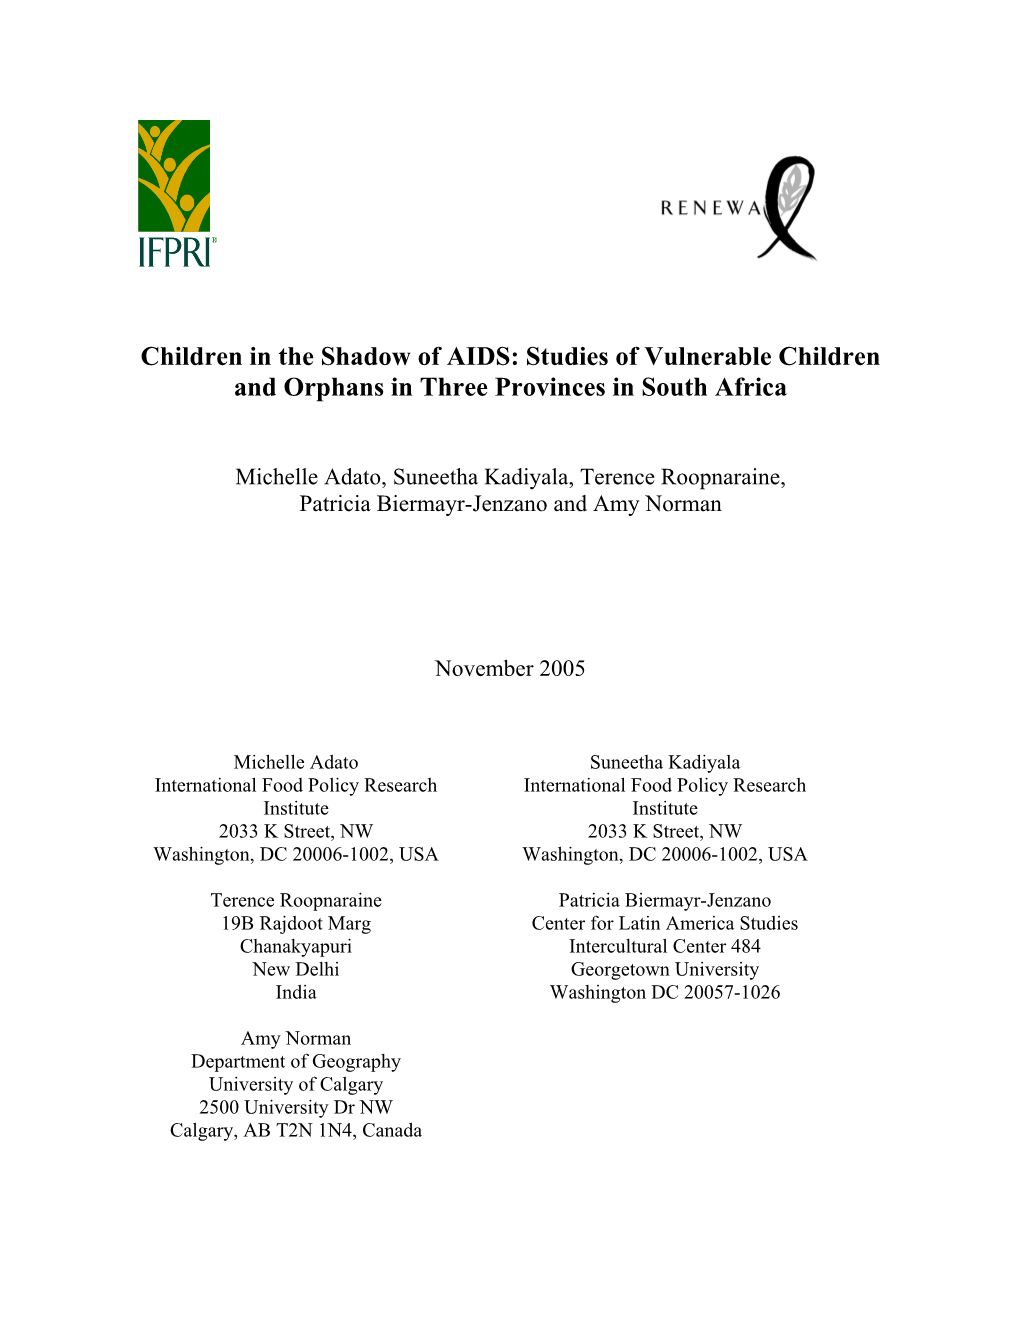 Children in the Shadow of AIDS: Studies of Vulnerable Children and Orphans in Three Provinces in South Africa